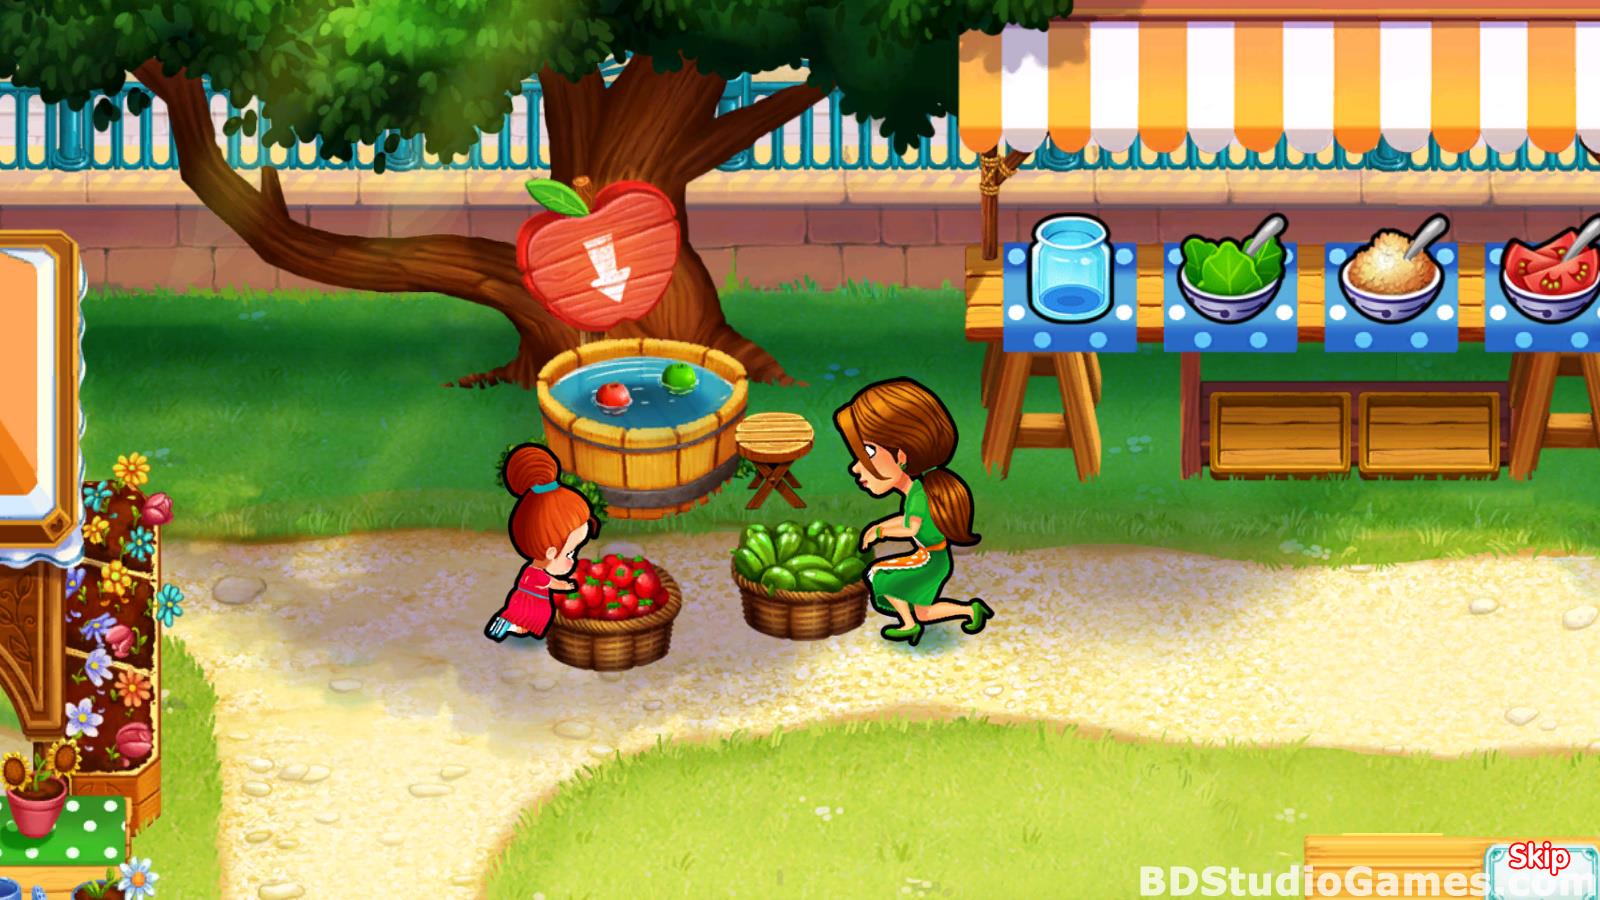 Delicious: Emily's Road Trip Game Download Screenshots 01